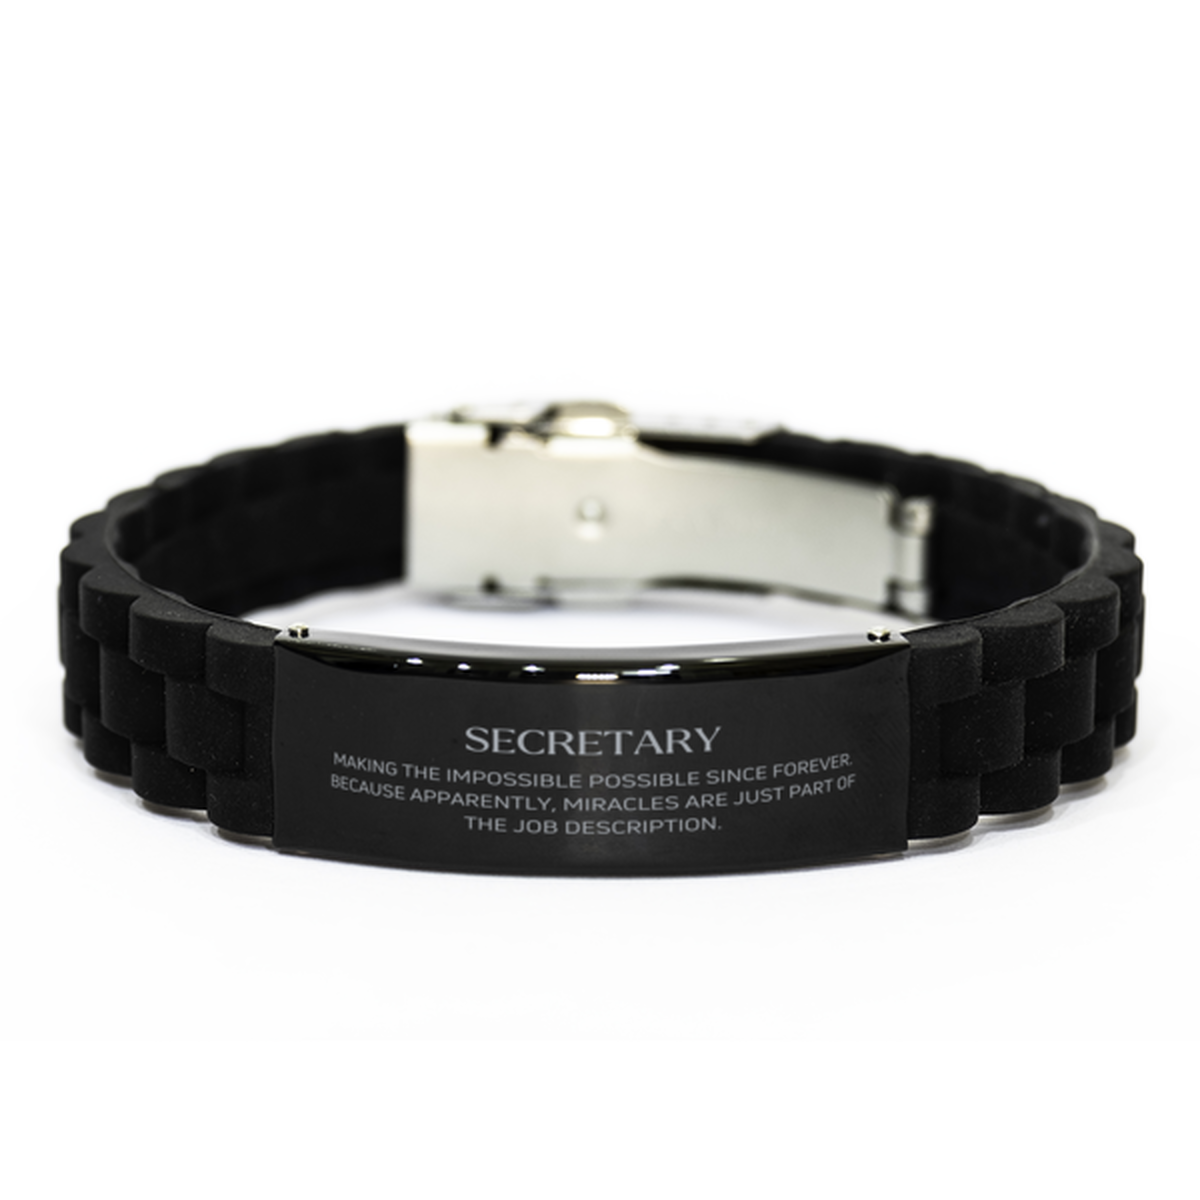 Funny Secretary Gifts, Miracles are just part of the job description, Inspirational Birthday Black Glidelock Clasp Bracelet For Secretary, Men, Women, Coworkers, Friends, Boss